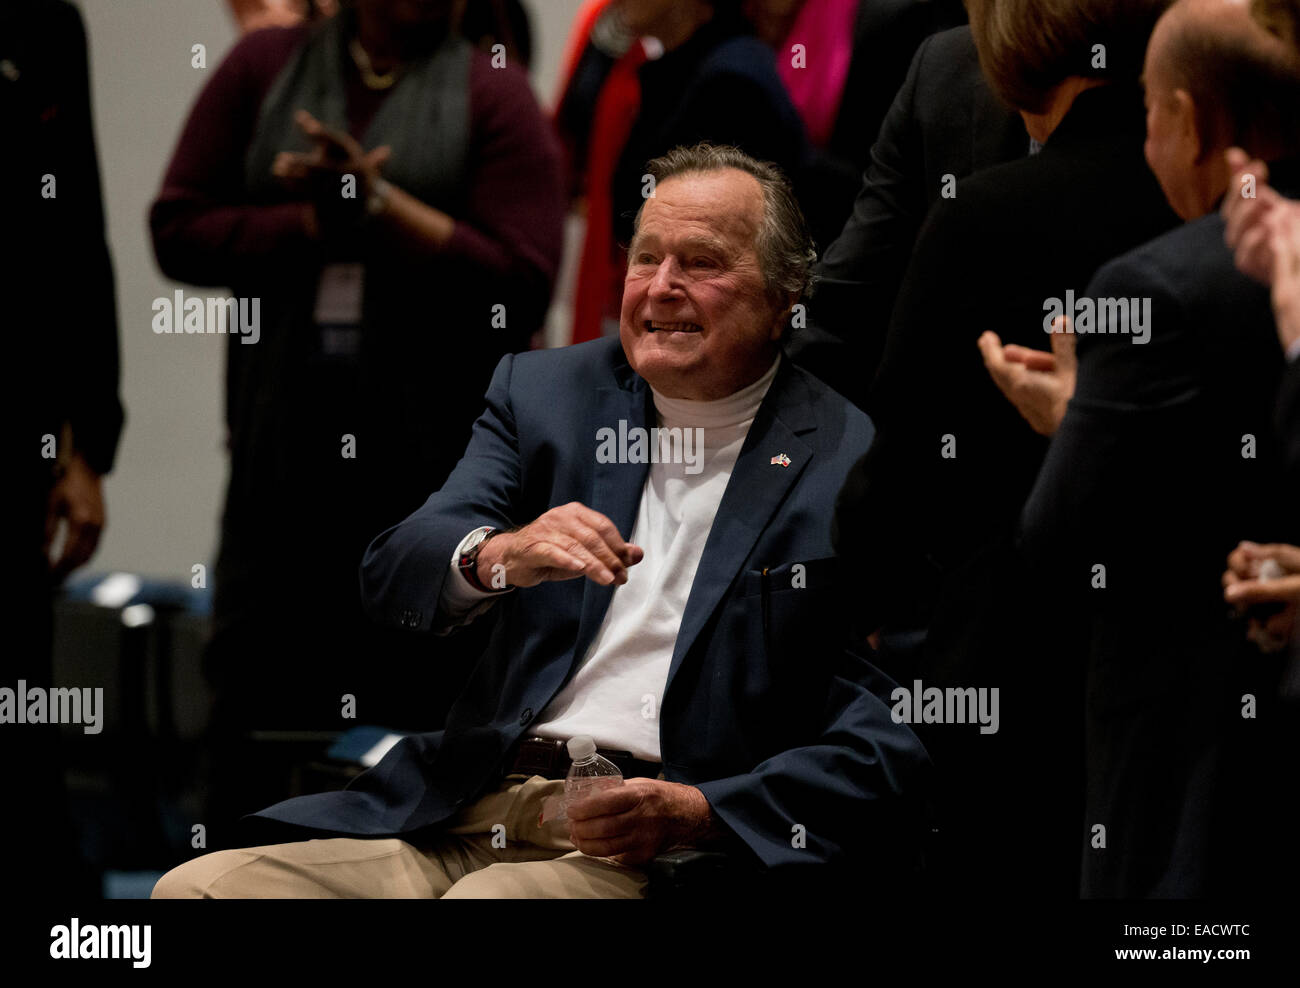 College Station, Texas, USA. 11th November, 2014. Former U.S. President George H. W. Bush waves as his son former President George W. Bush talks about his new book, '41 A Portrait of My Father'  during a book event at the Bush Library at Texas A&M University. Bush, 90, was the 41st President of the United States. Credit:  Bob Daemmrich/Alamy Live News Stock Photo